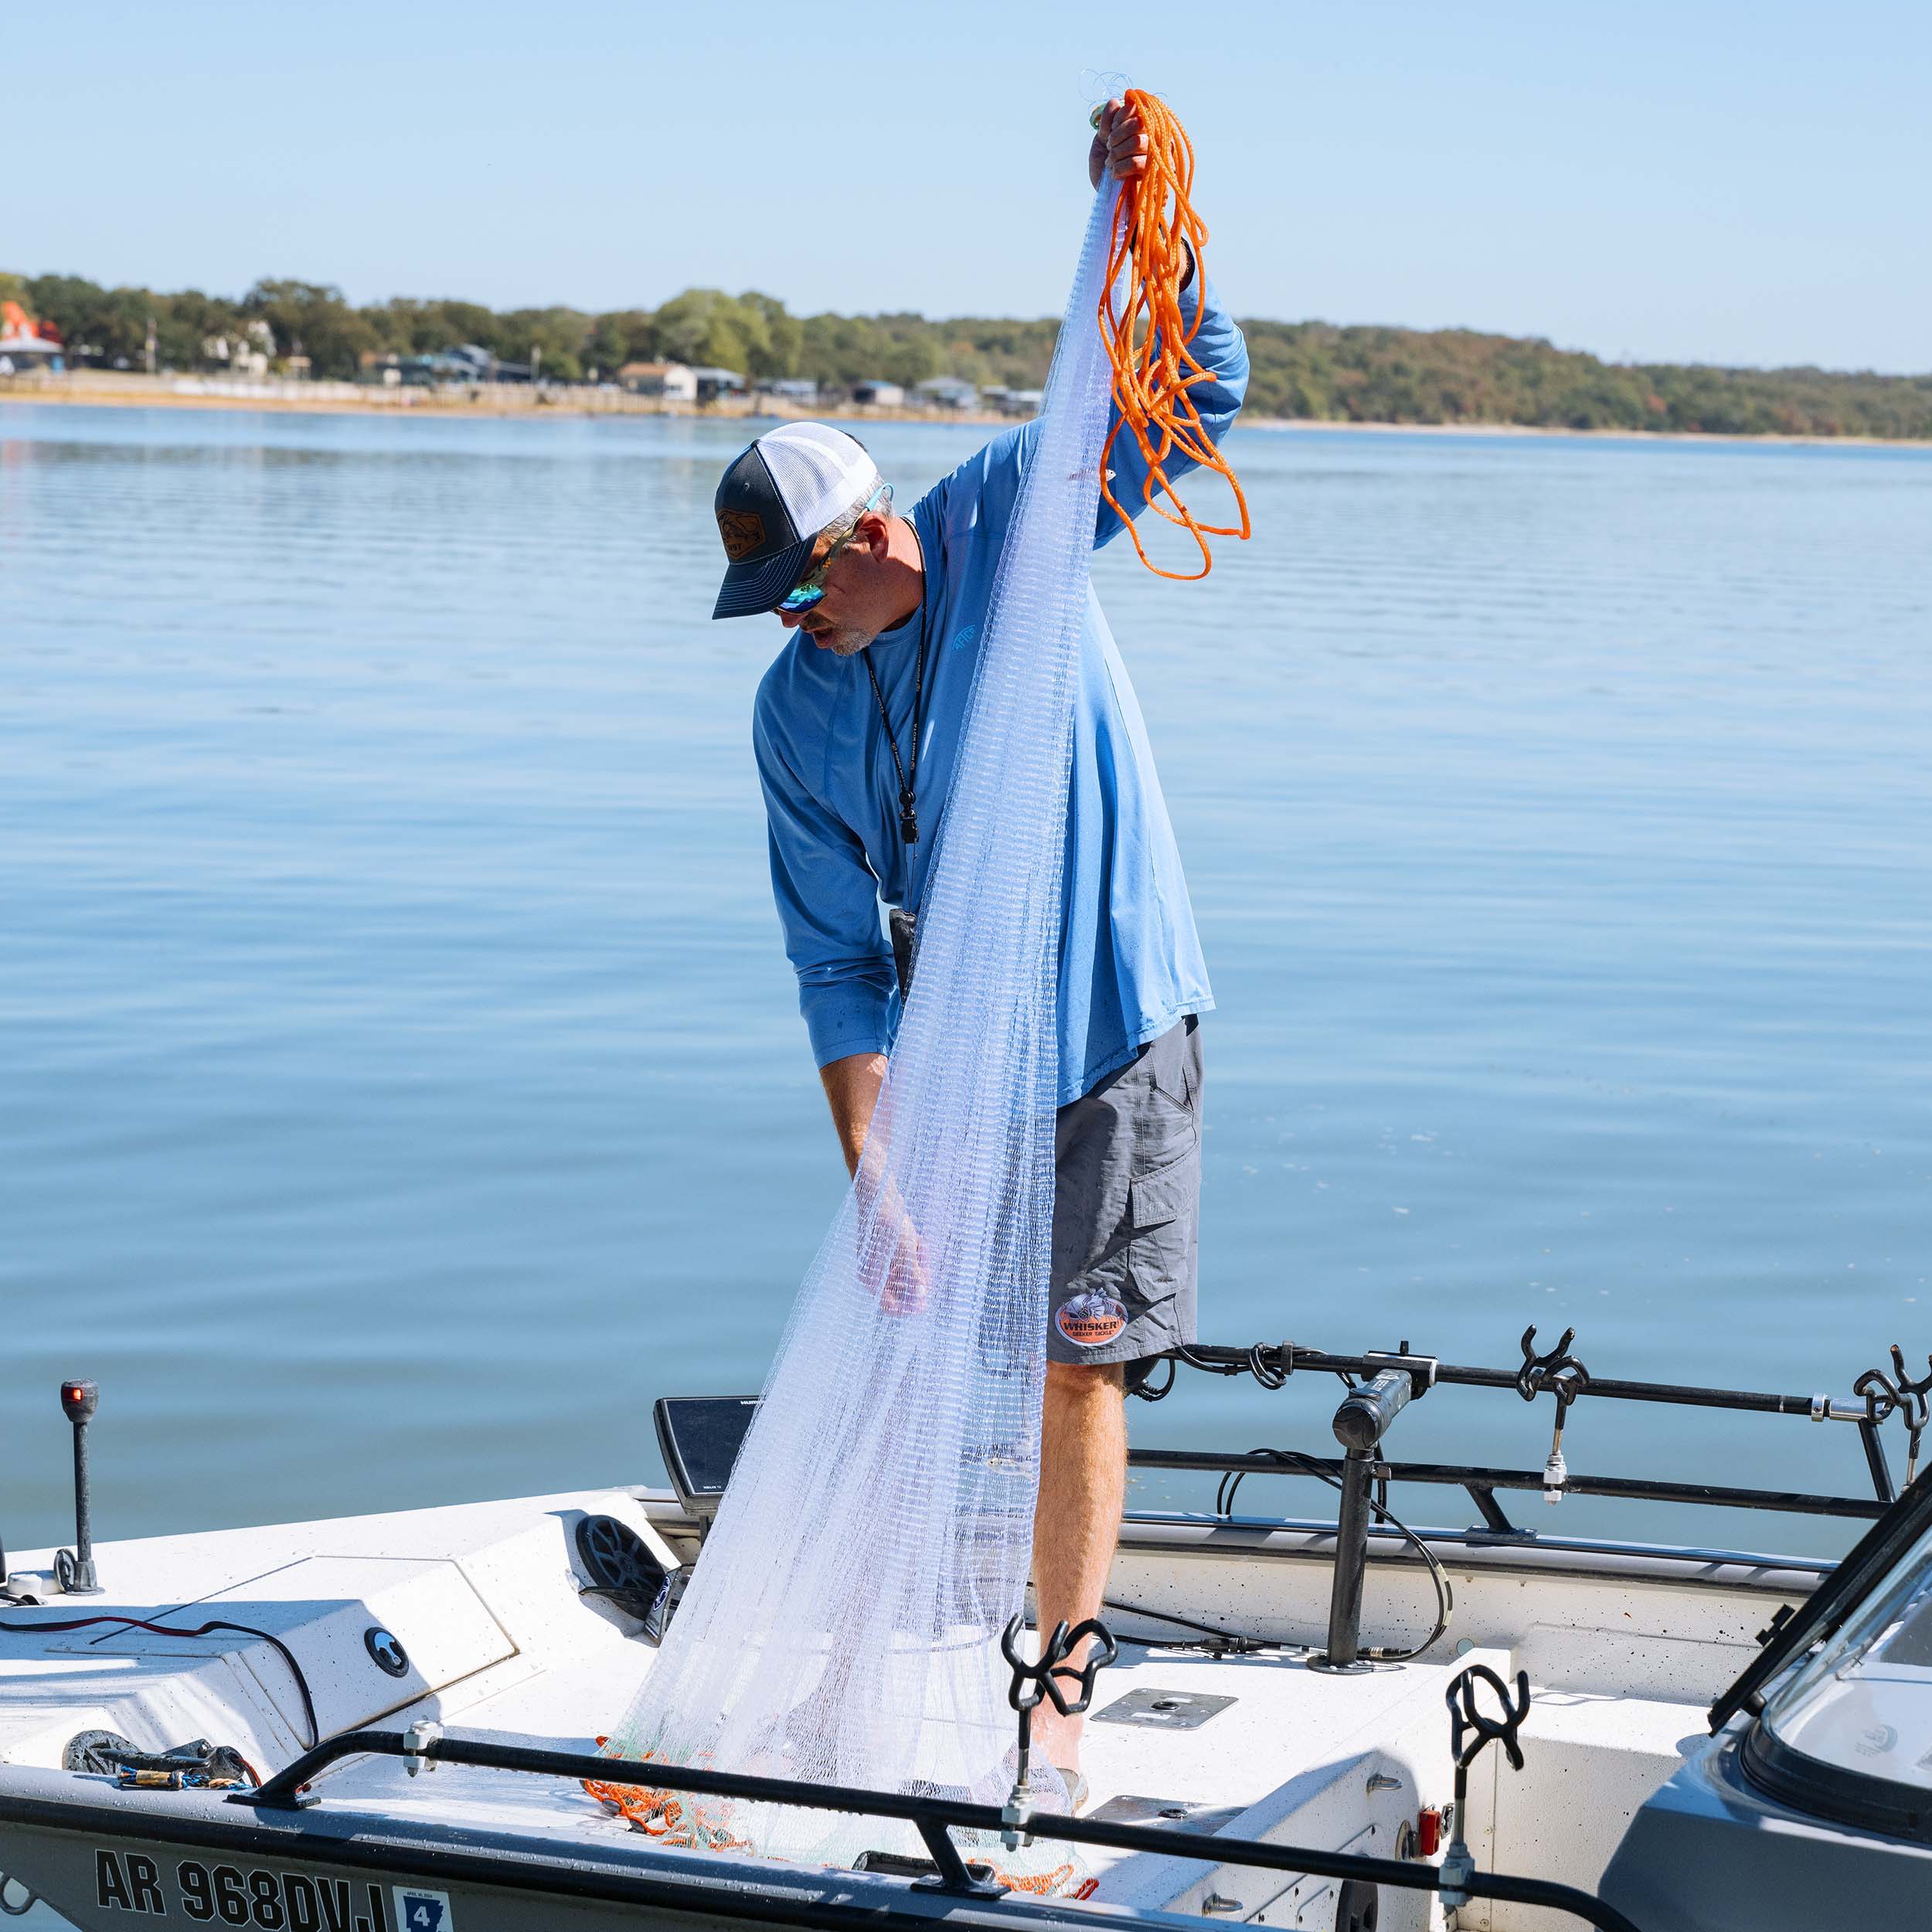 Proper technique for holding your net in preparation to throw